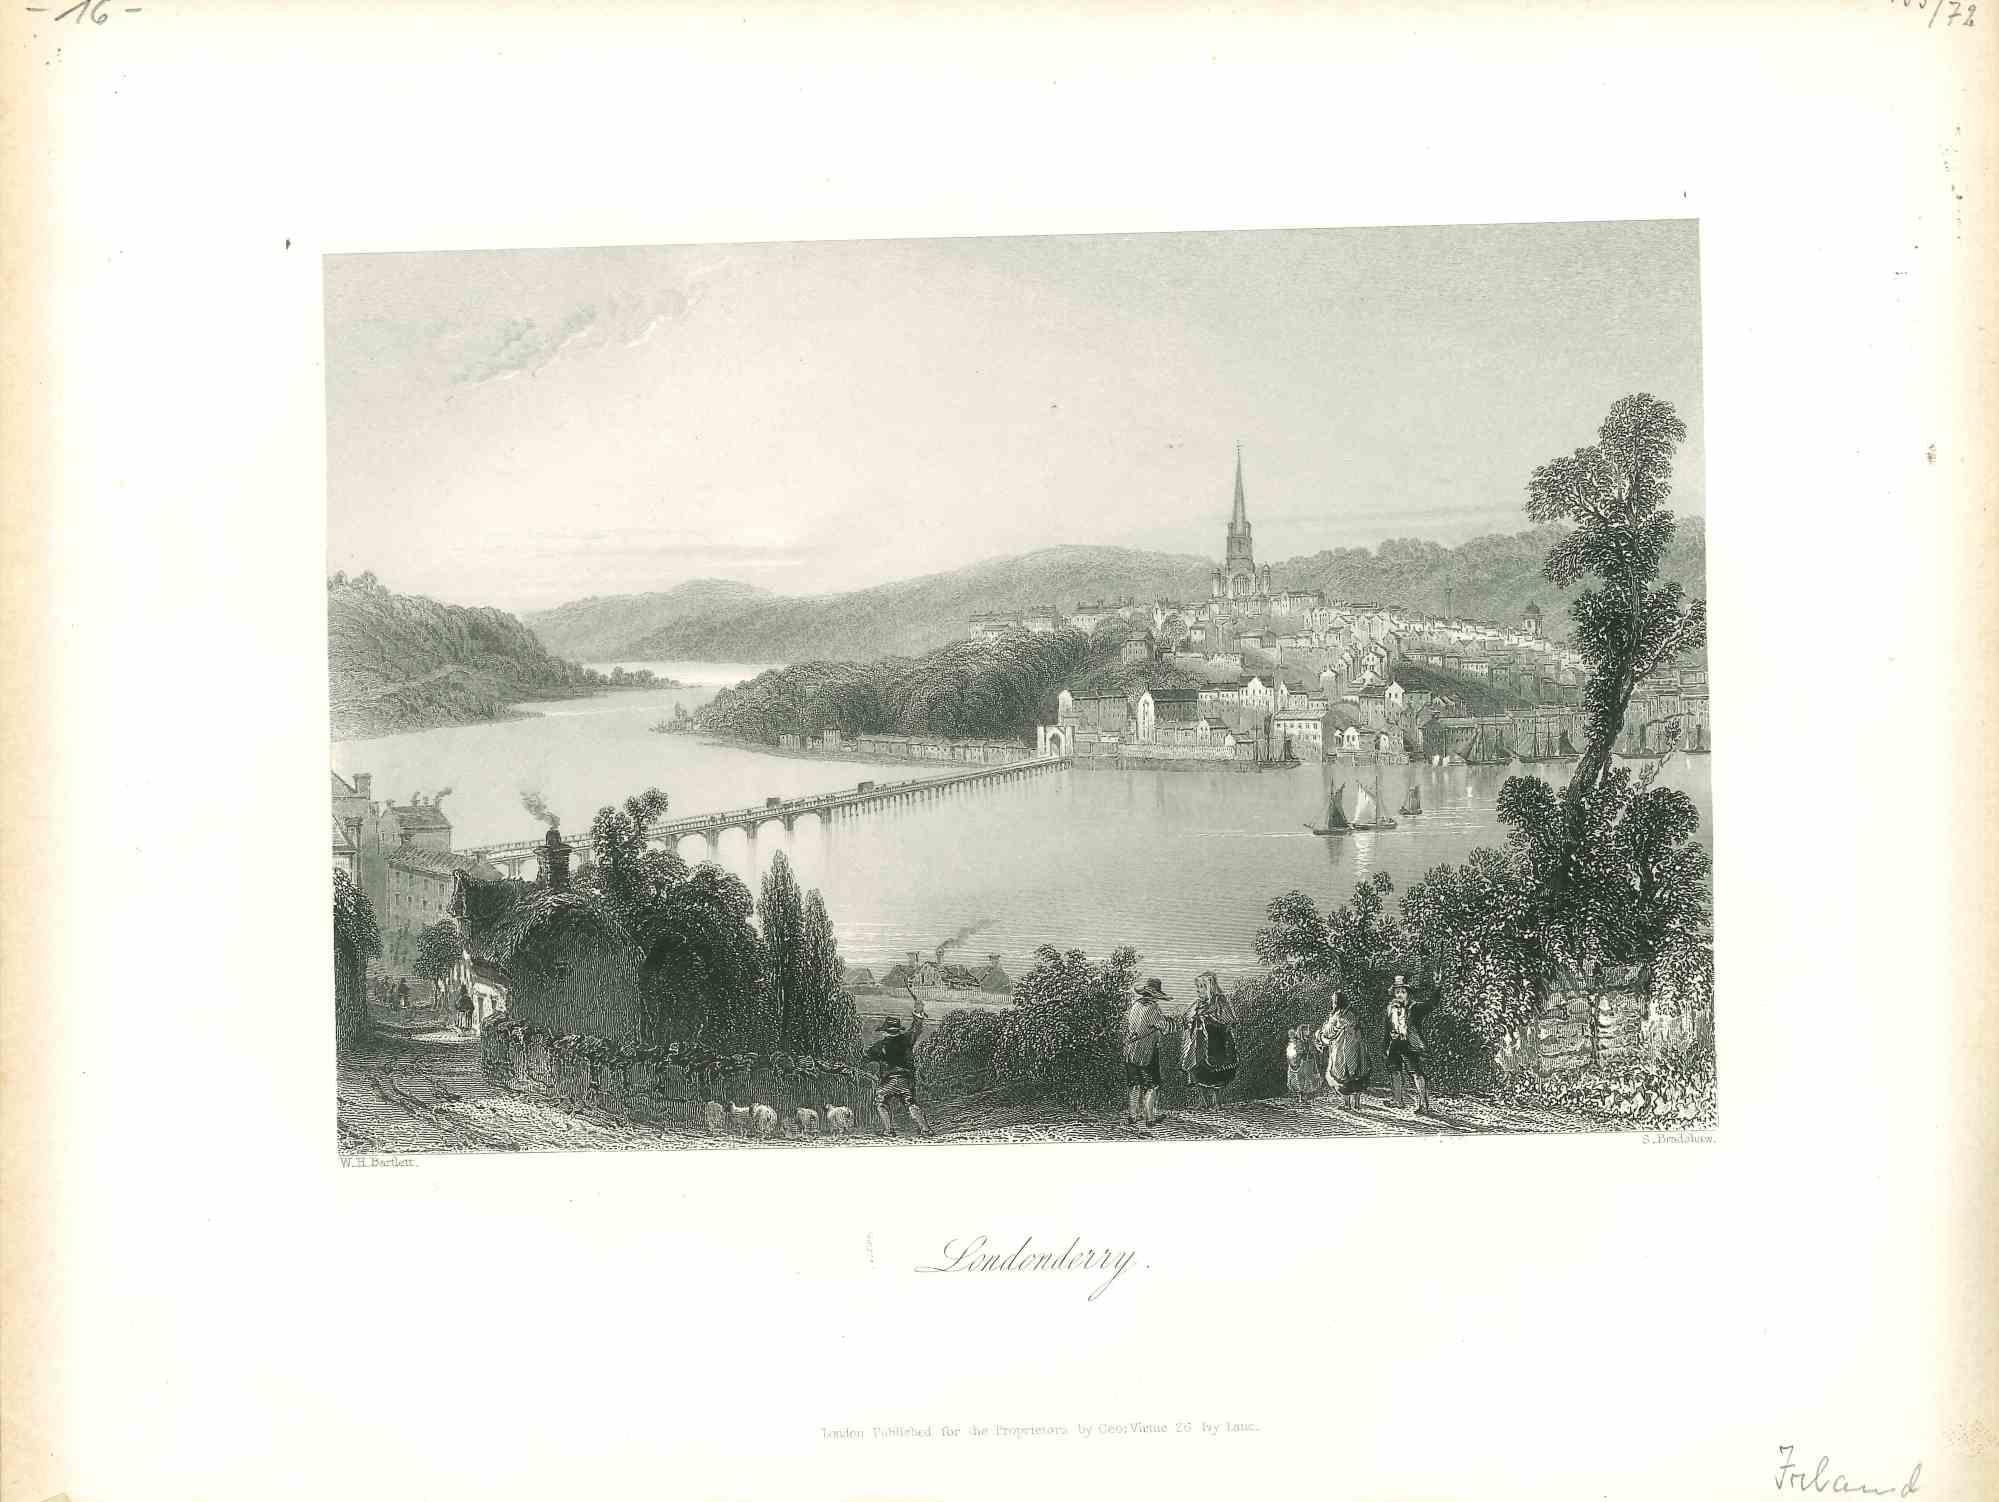 Unknown Landscape Print - Londonderry - Original Lithograph - Mid-19th Century